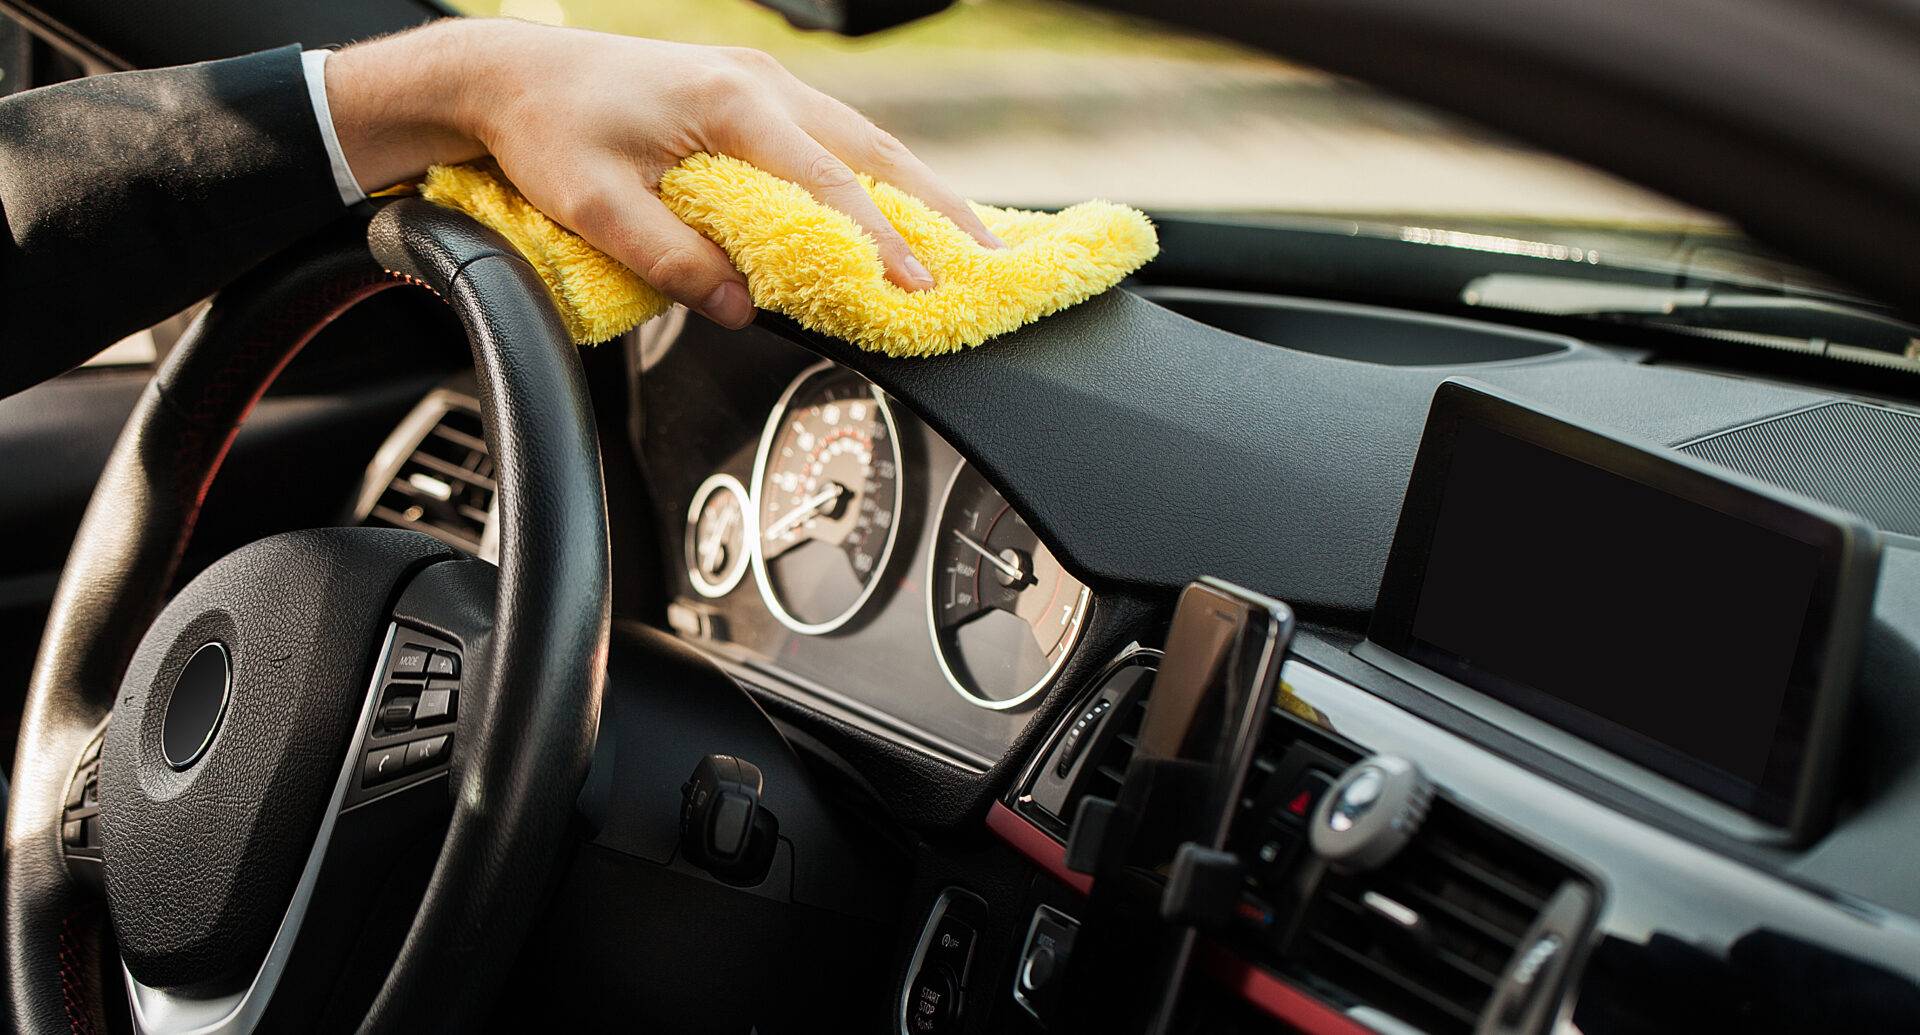 Cleaning car. Hand with microfiber cloth cleaning car interior